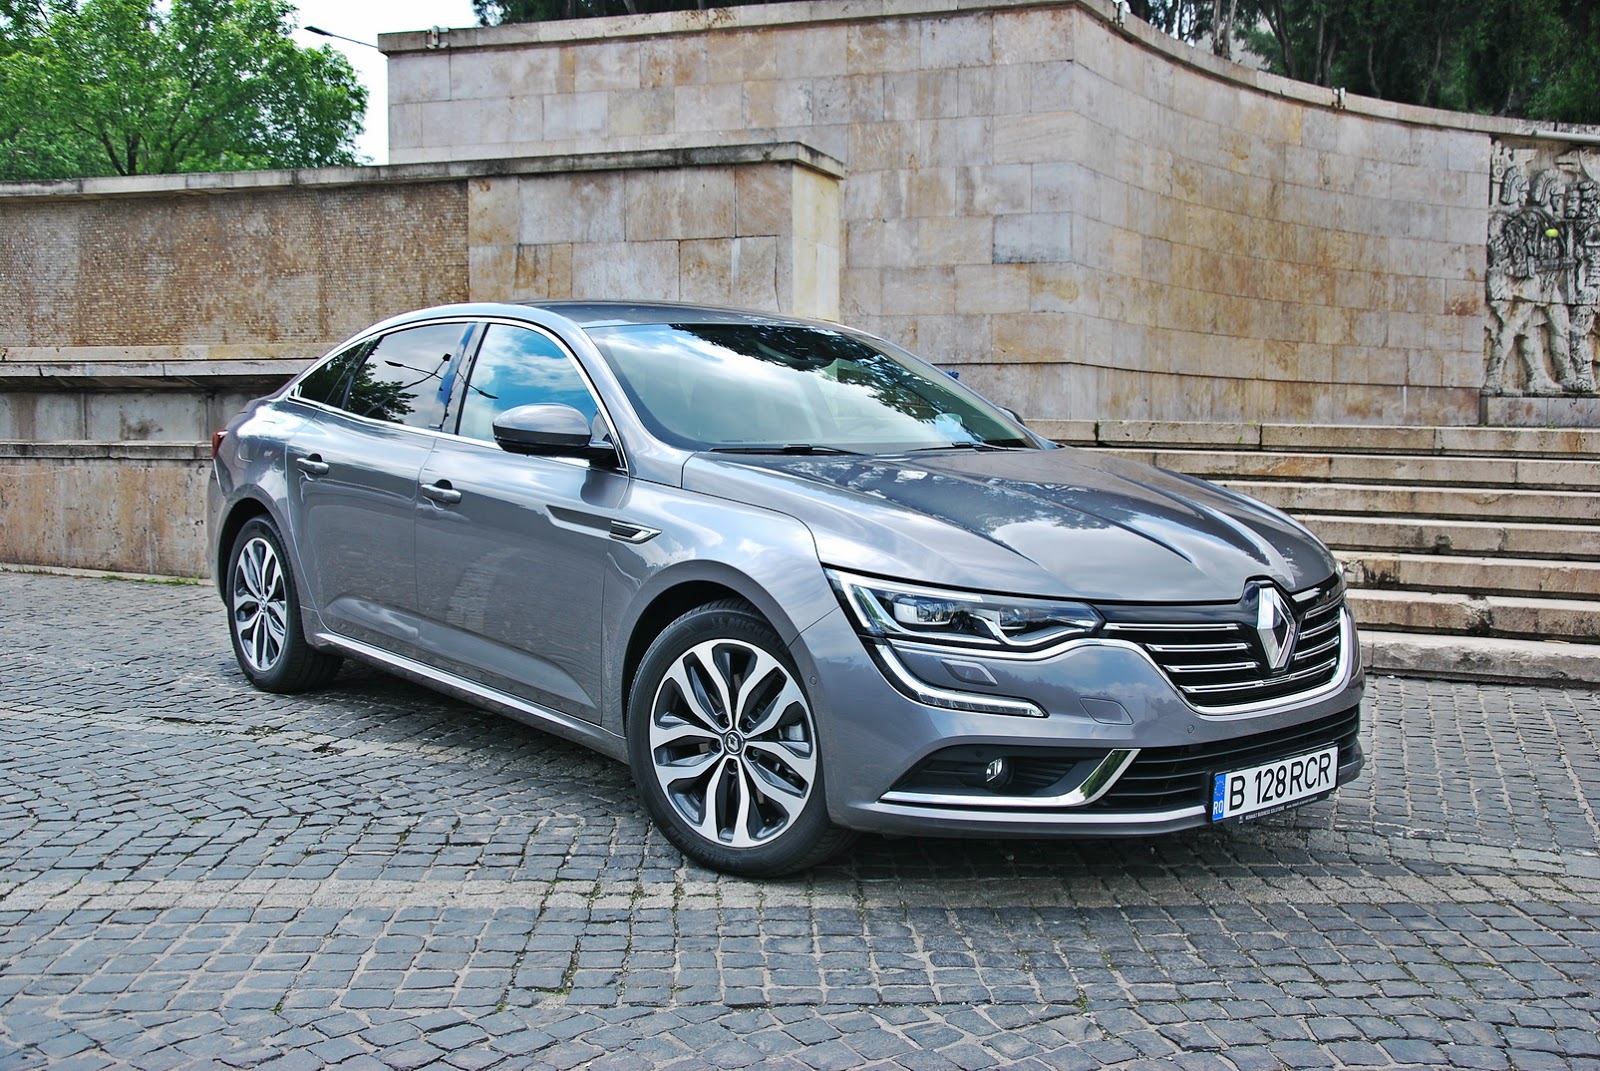 2016 Renault Talisman Driven Is It A Player In Mid Size Saloon Class Carscoops